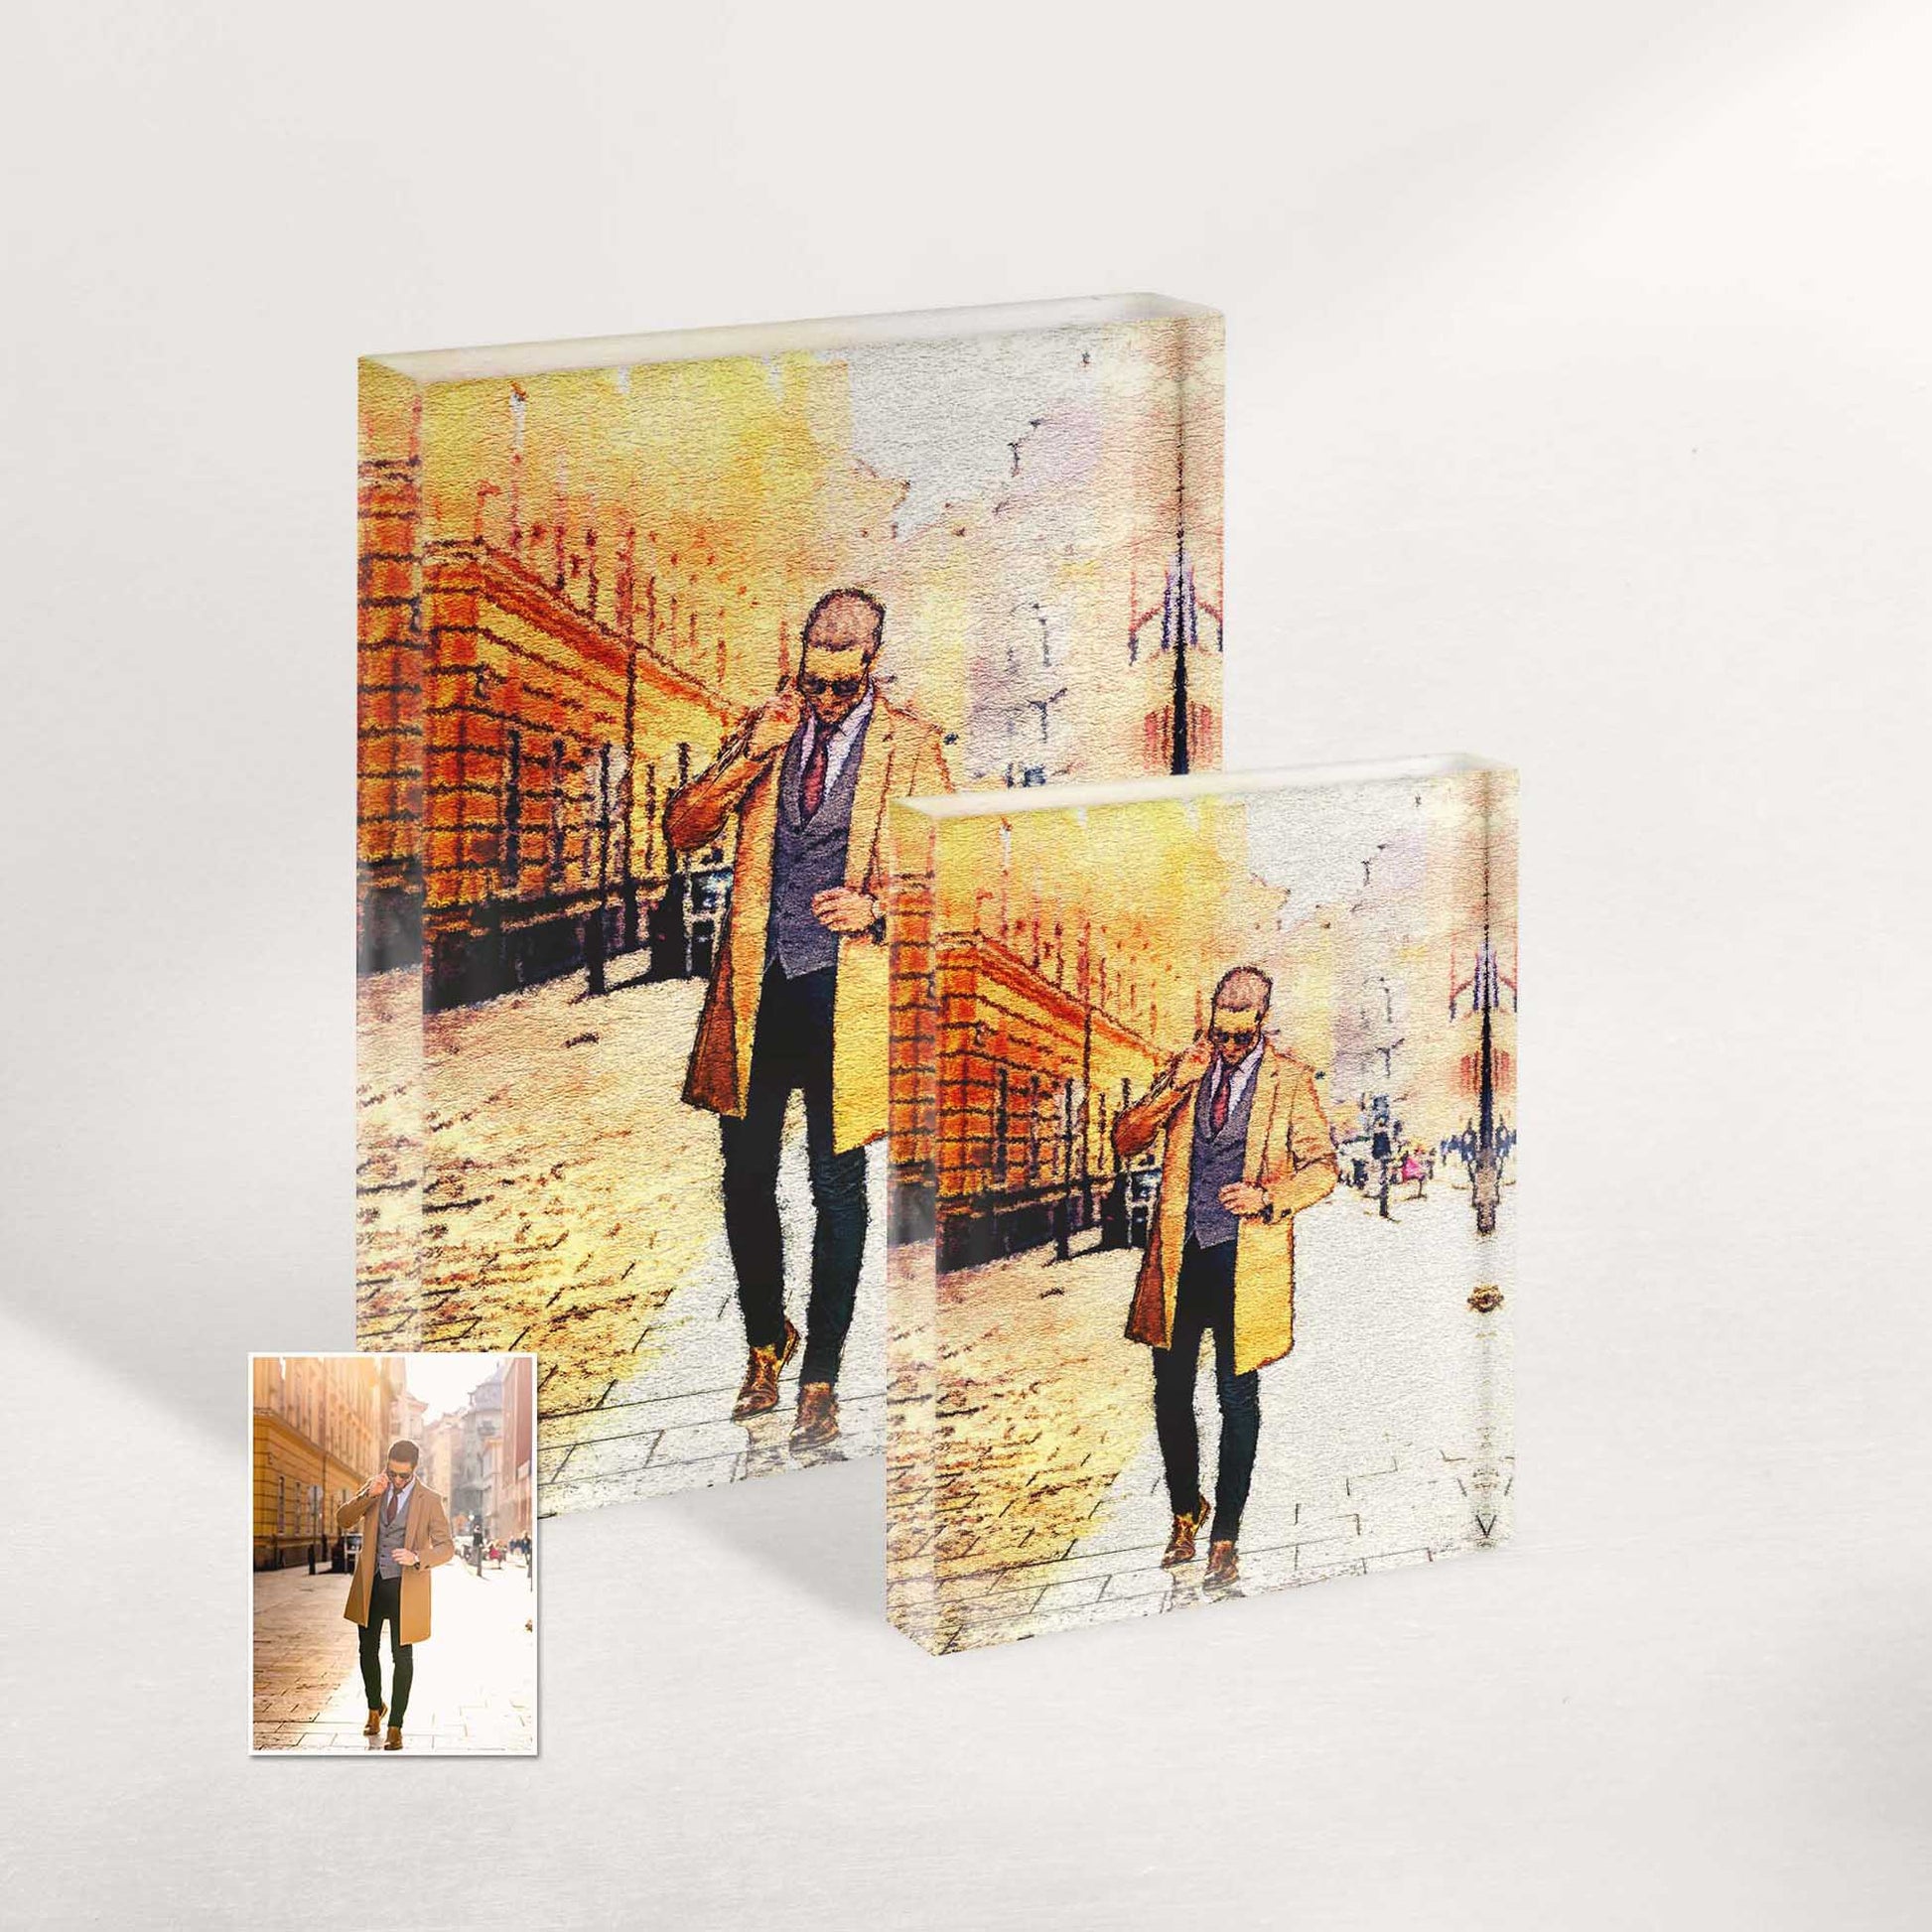 Add a touch of elegance and artistry to your space with our Personalised Aquarelle Acrylic Block Photo. Each piece is created from your own photo, expertly transformed into a breathtaking watercolor-style